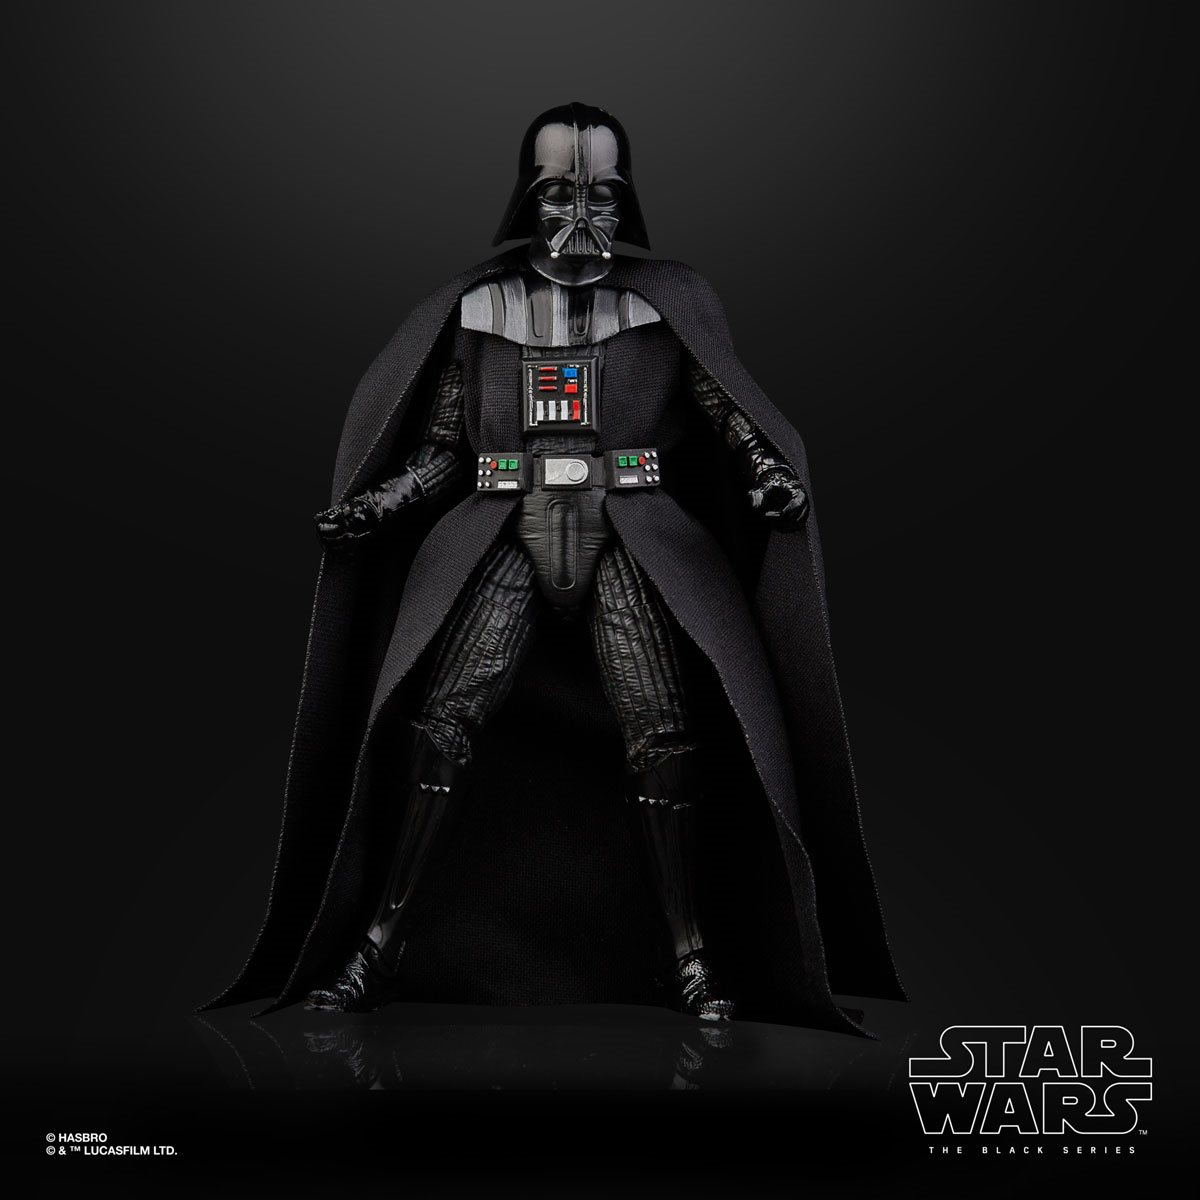 Star Wars The Black Series Empire Strikes Back 40th Anniversary 6 Inch Darth Vader Action Figure